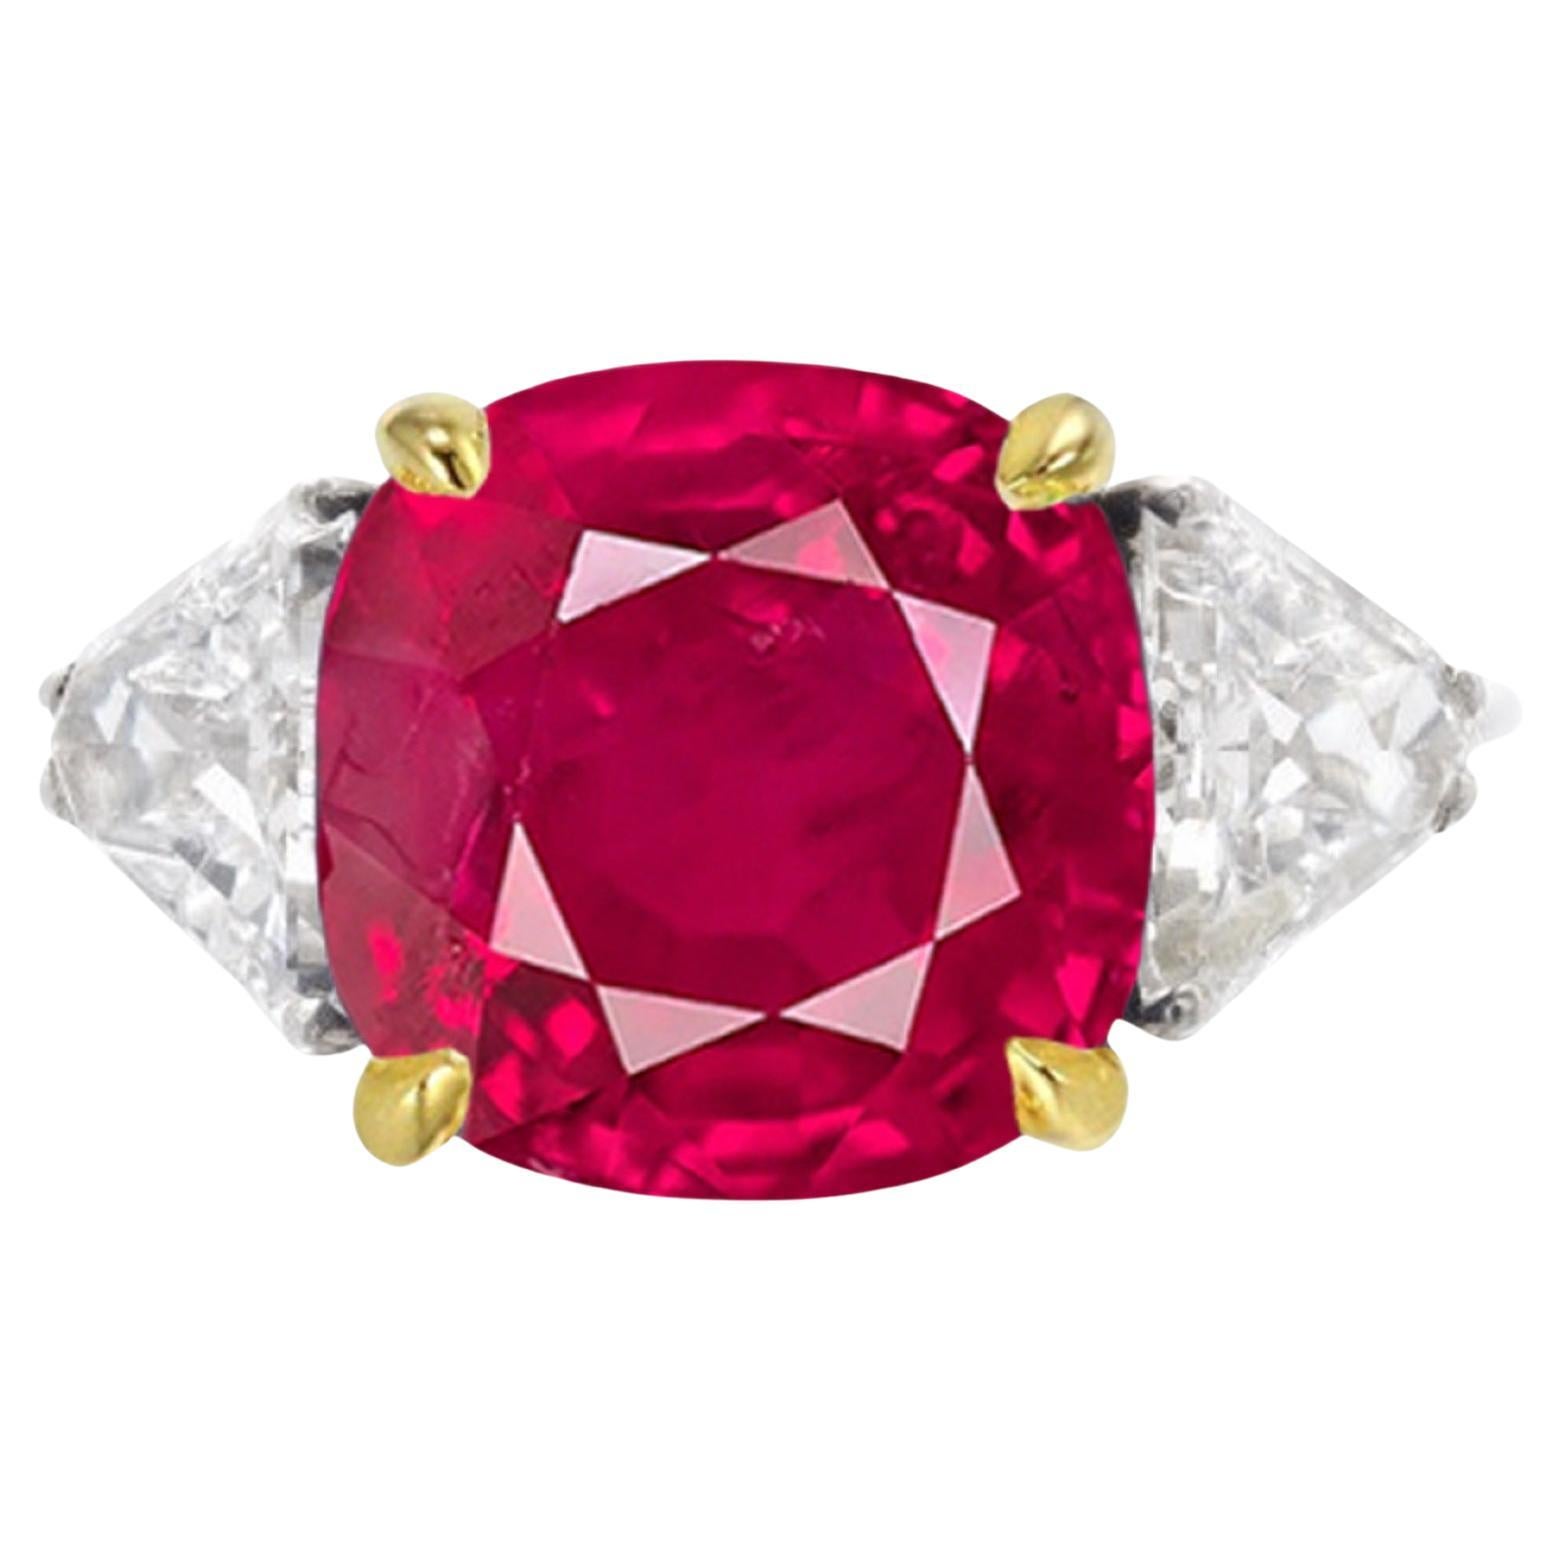 Certified TIGL 5 Carat Pigeon Blood Red Cushion Shape Ruby 18K Gold Ring For Sale